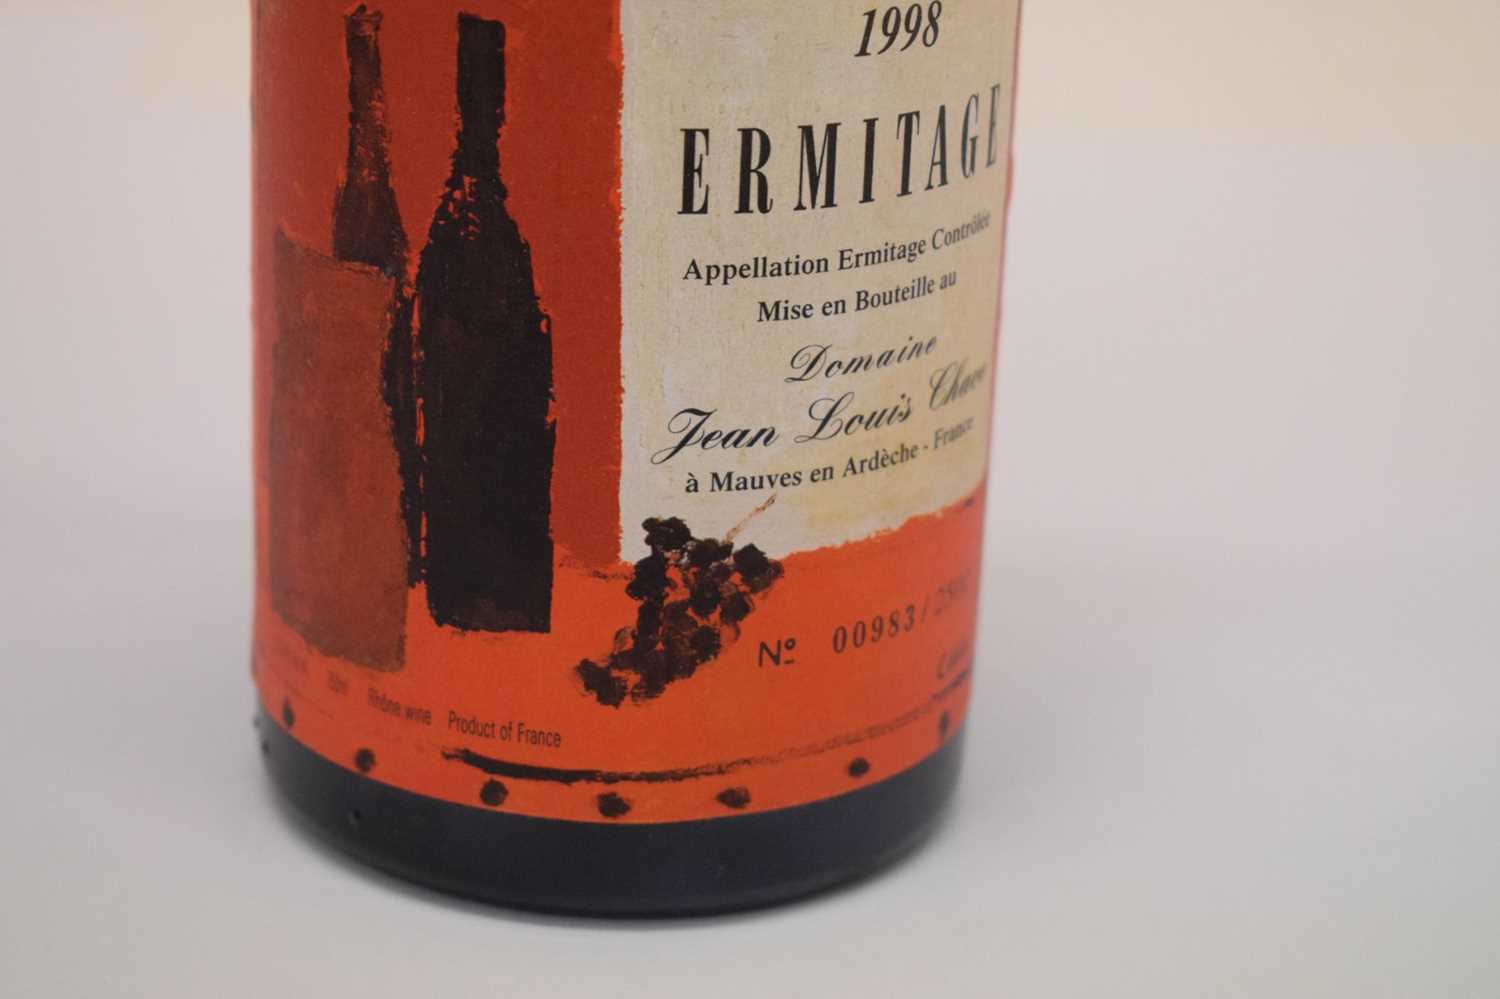 Domaine Jean-Louis Chave Ermitage 'Cuvée Cathelin', 1998, Hermitage, Rhône - Image 3 of 8